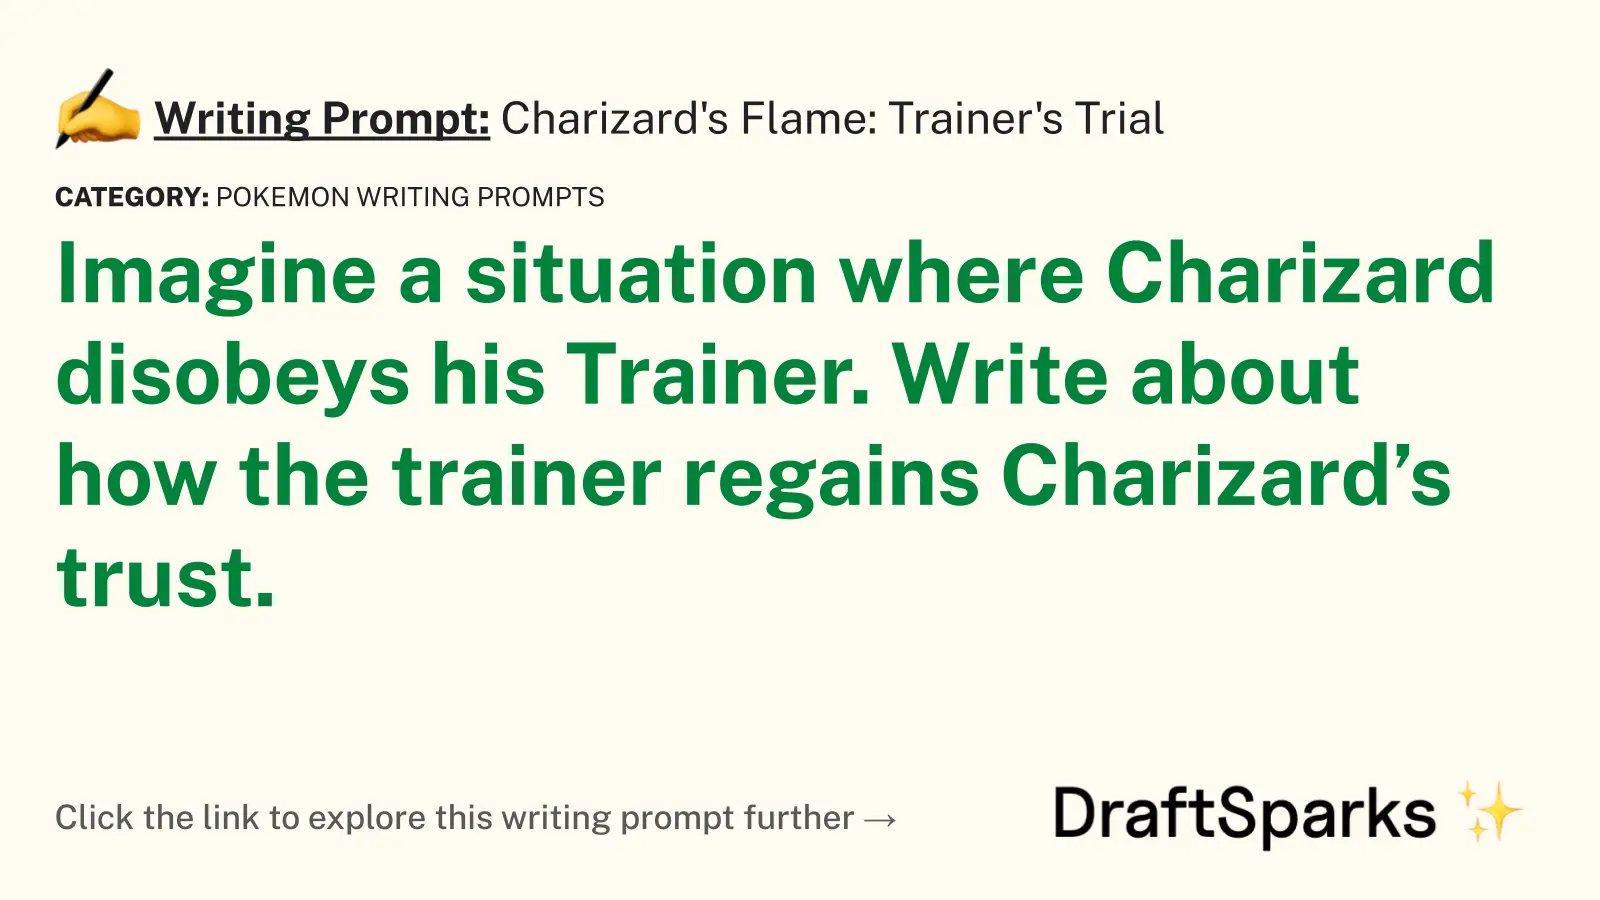 Charizard’s Flame: Trainer’s Trial